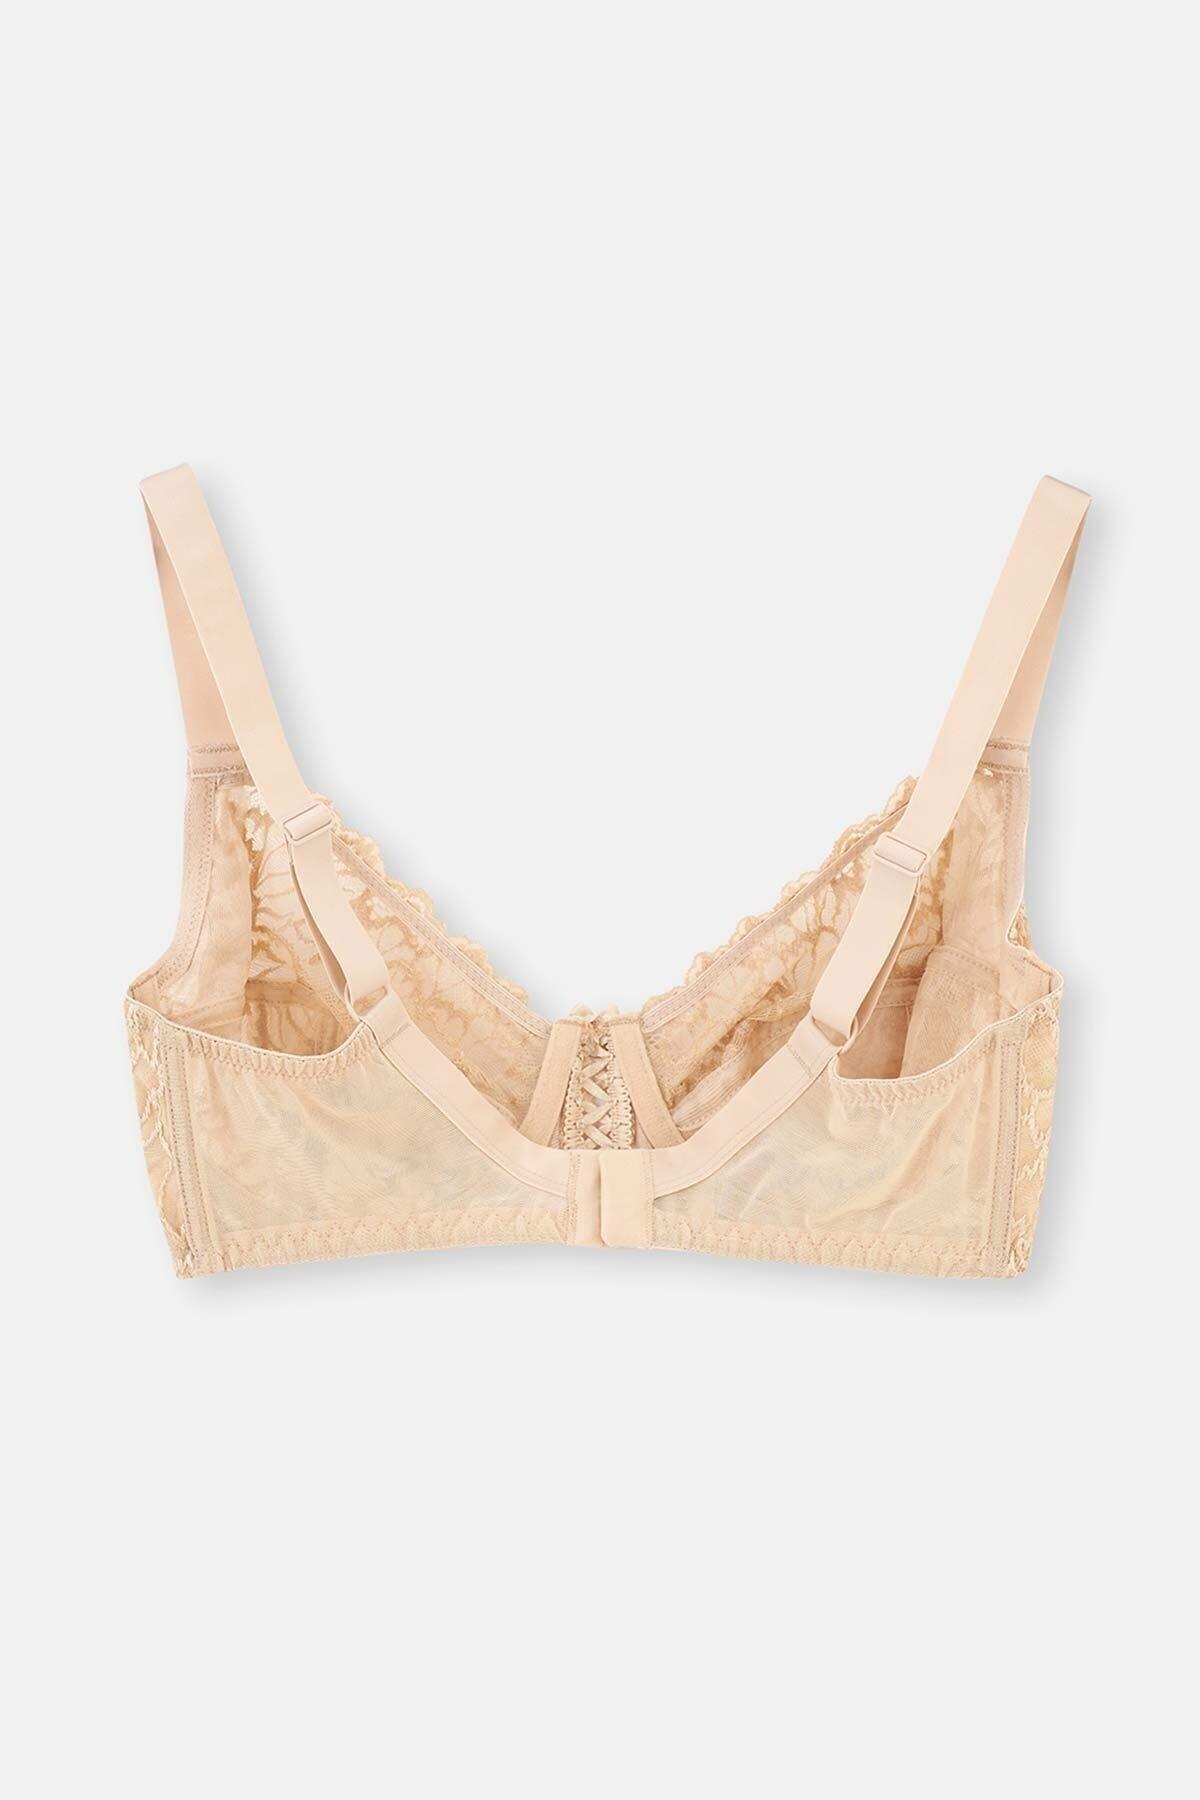 Dagi - Brown Laced Detailed Cupping Bra